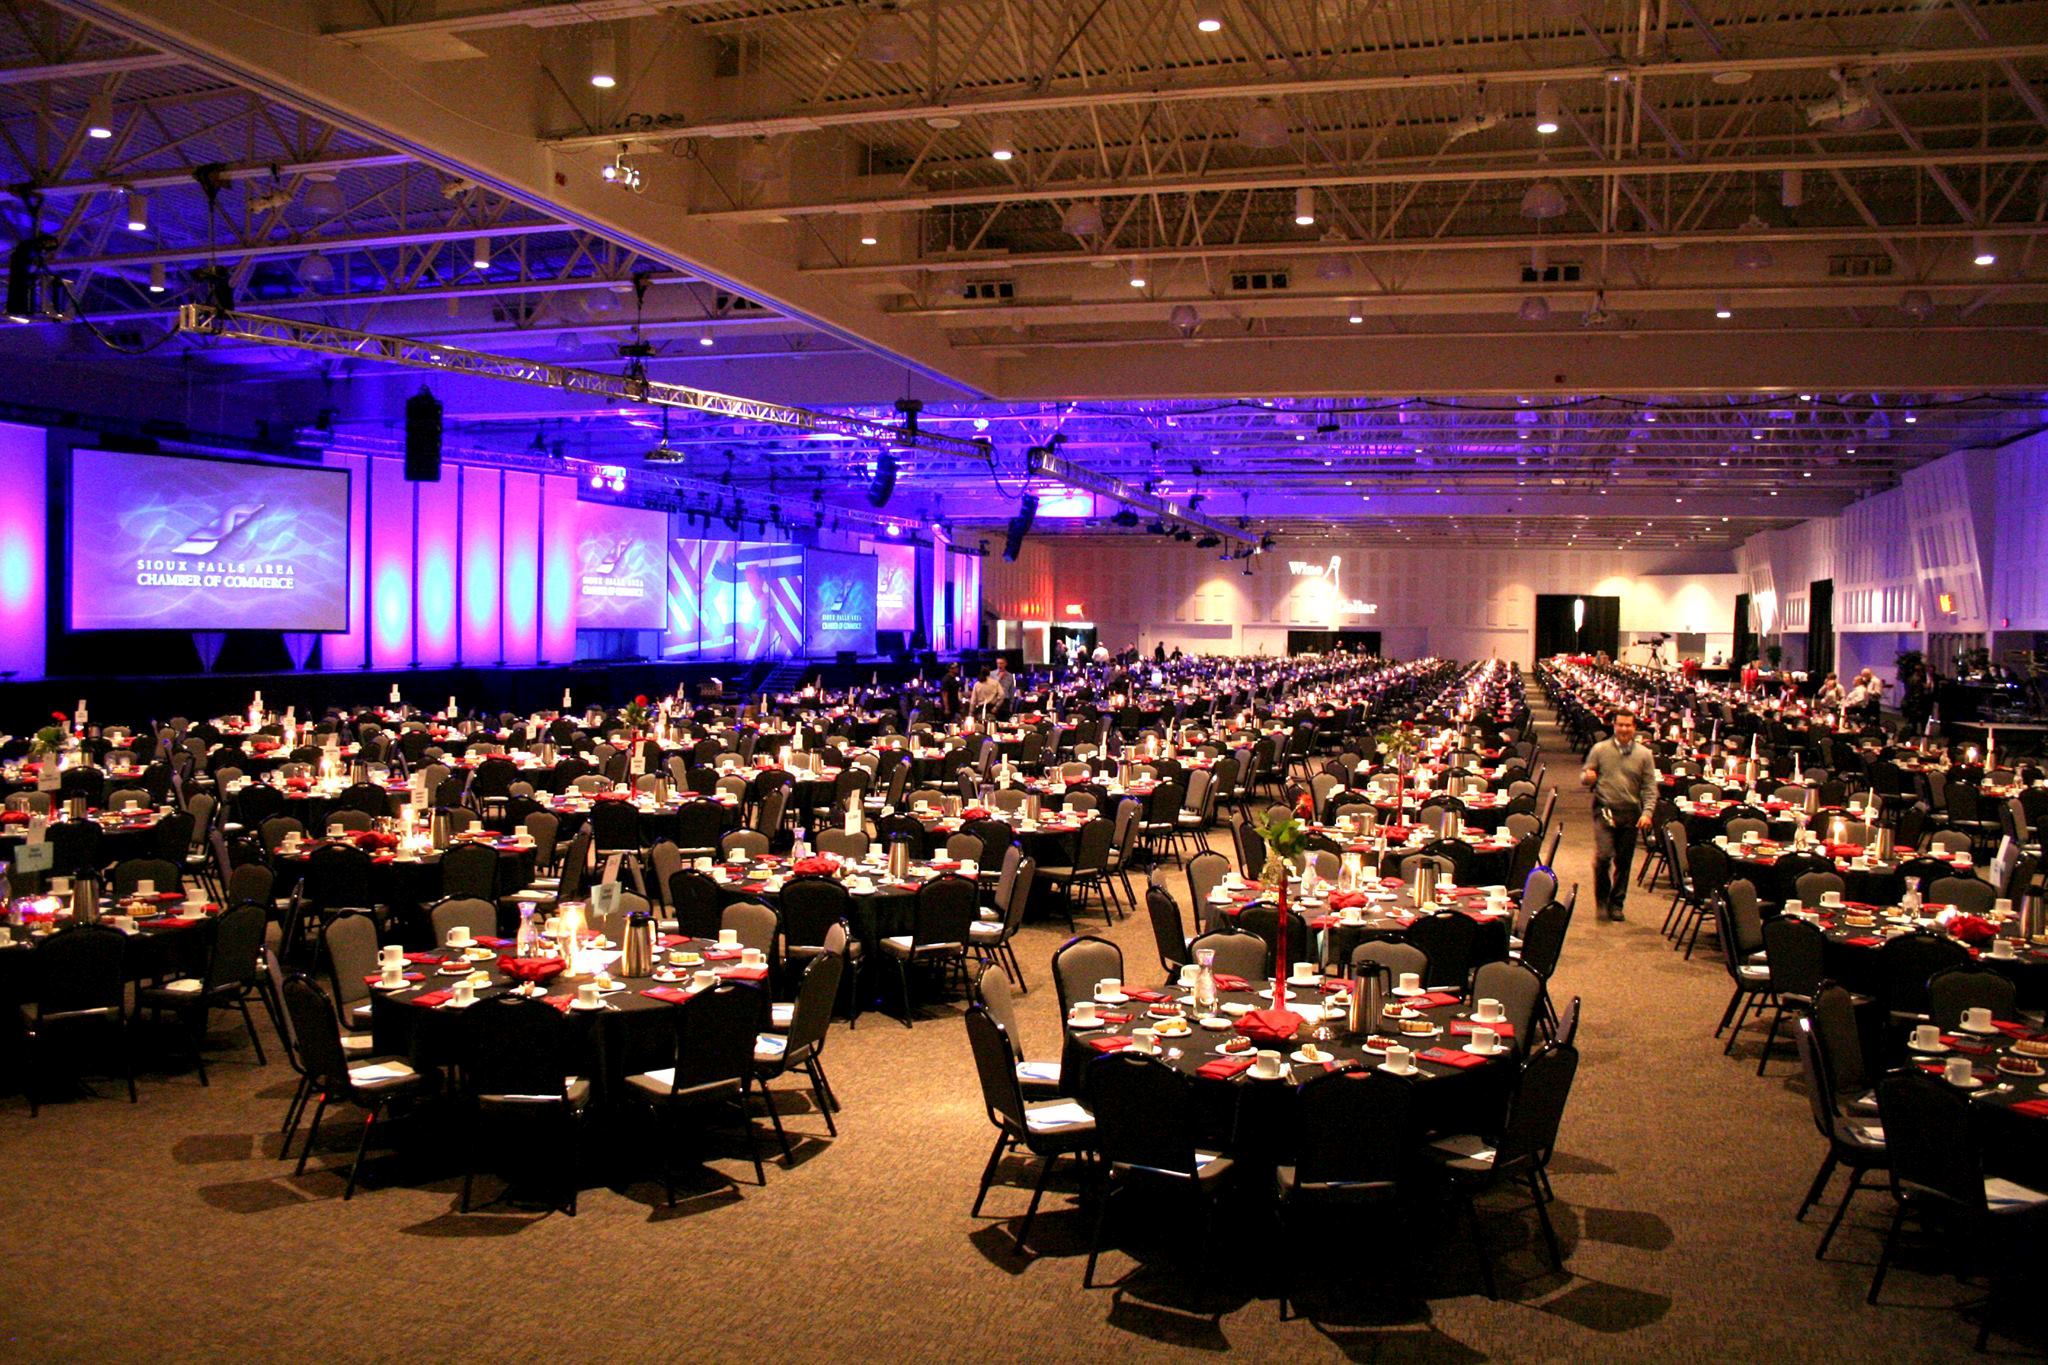 Sioux Falls Convention Center - 2